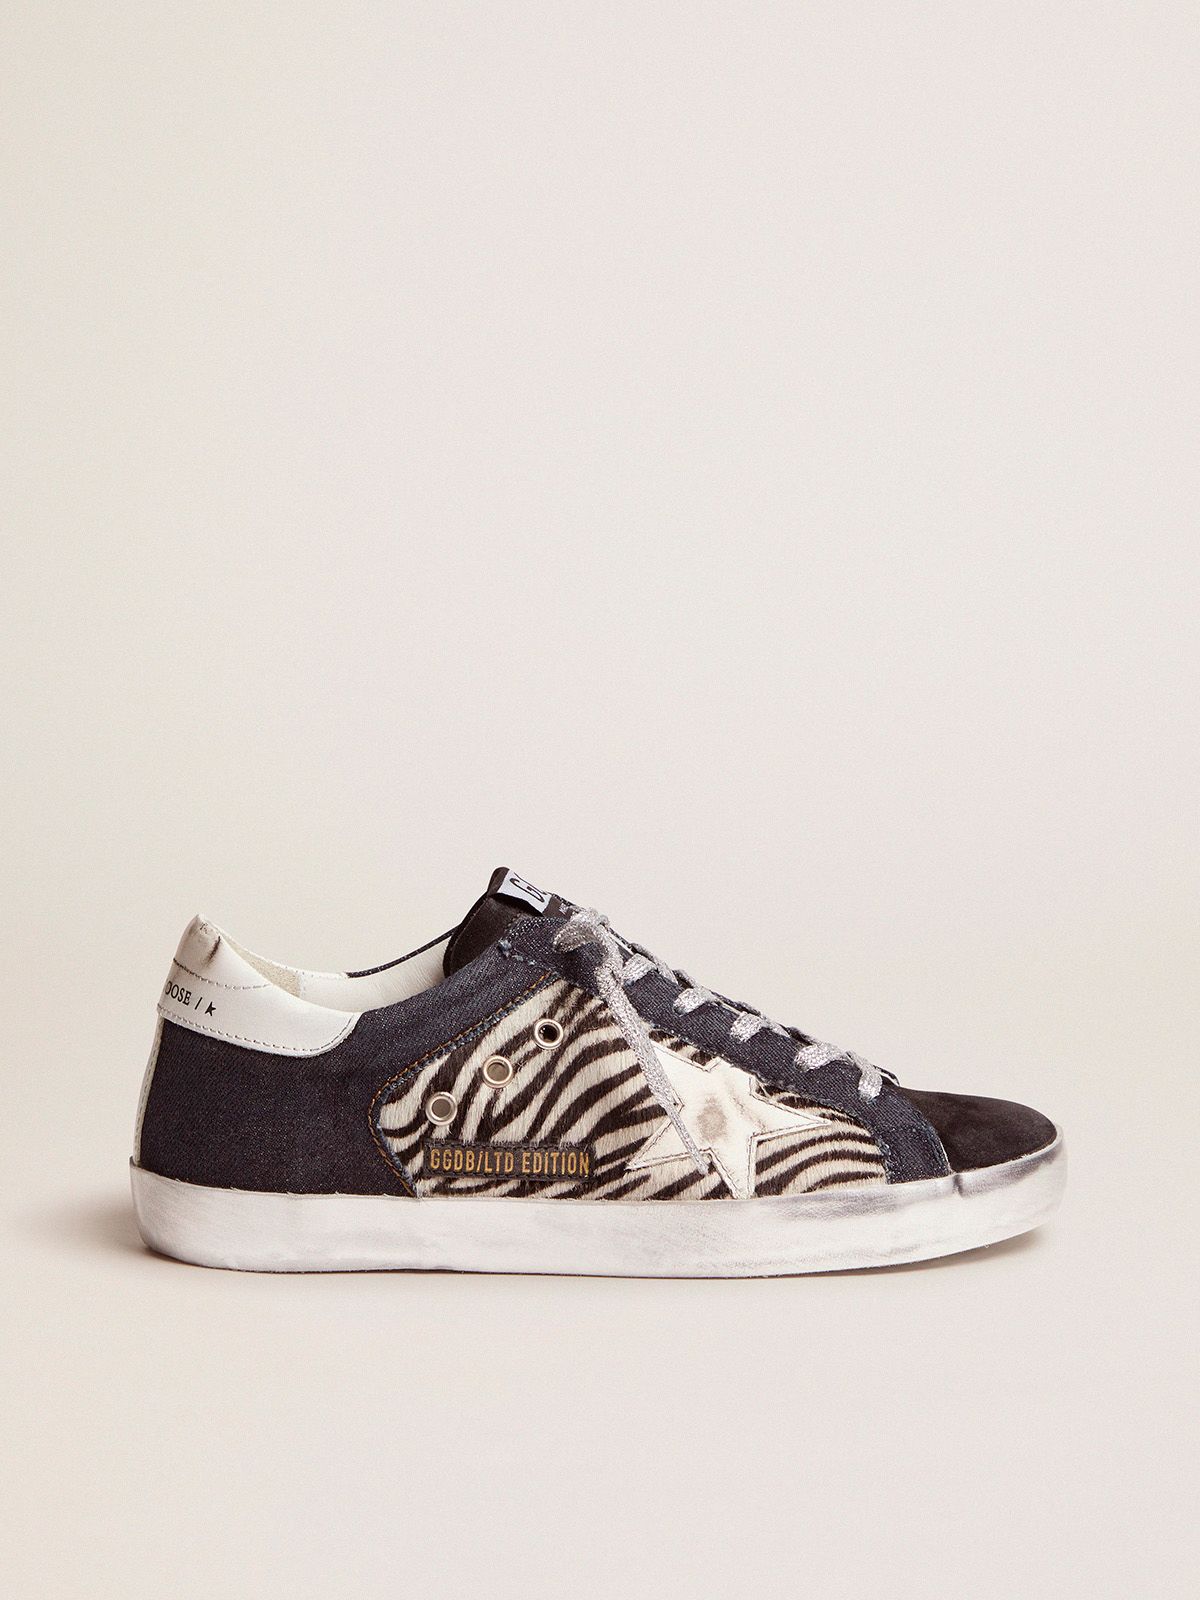 LAB Limited Edition Super-Star sneakers in denim, zebra-print pony skin and suede | 